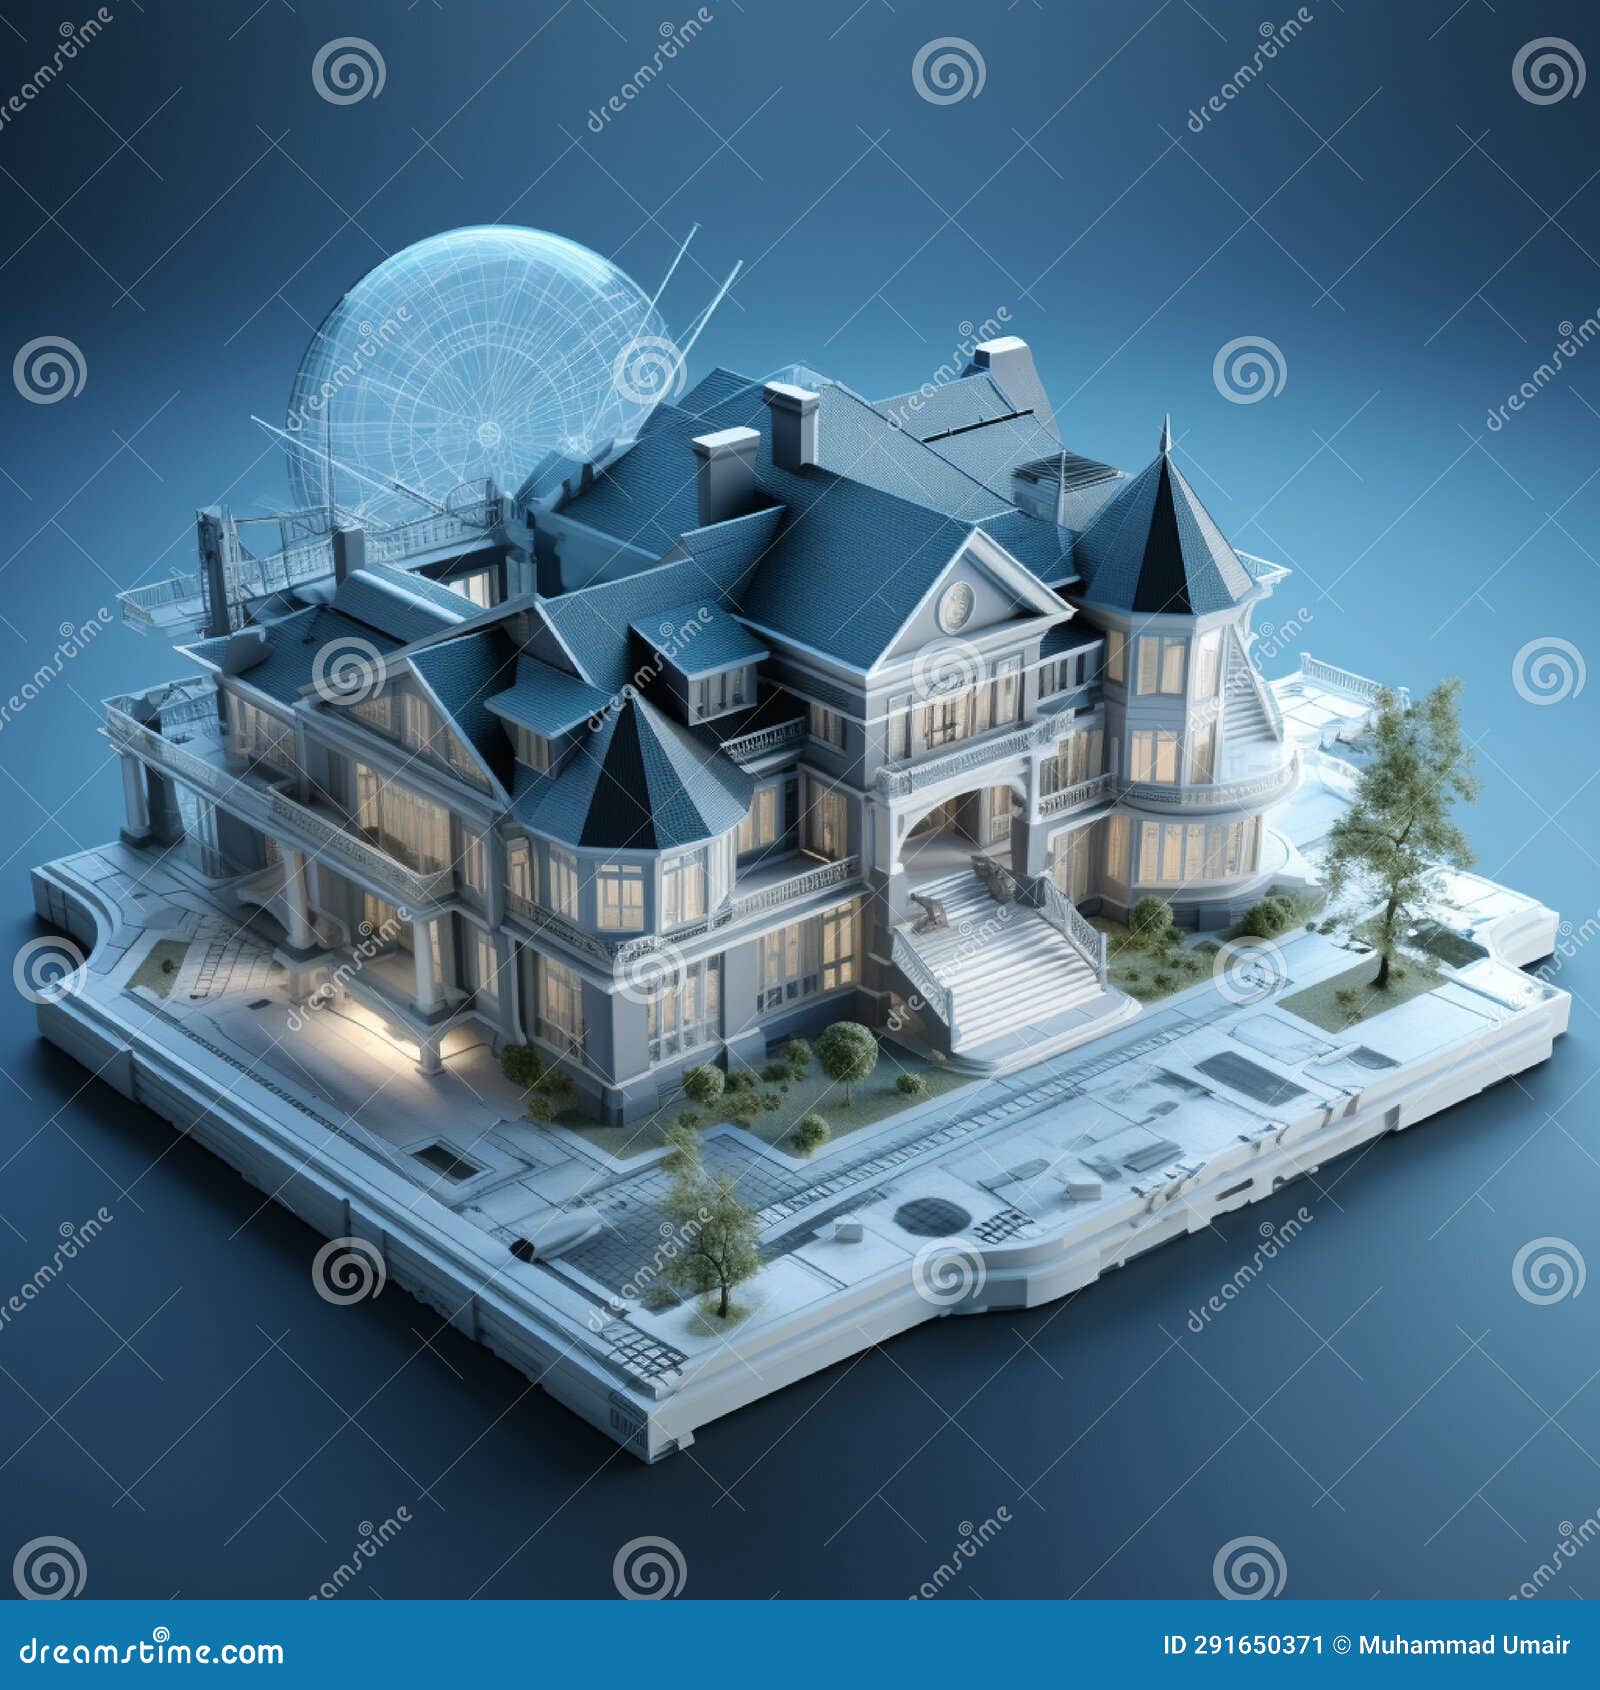 concept of building model generated by ai tool